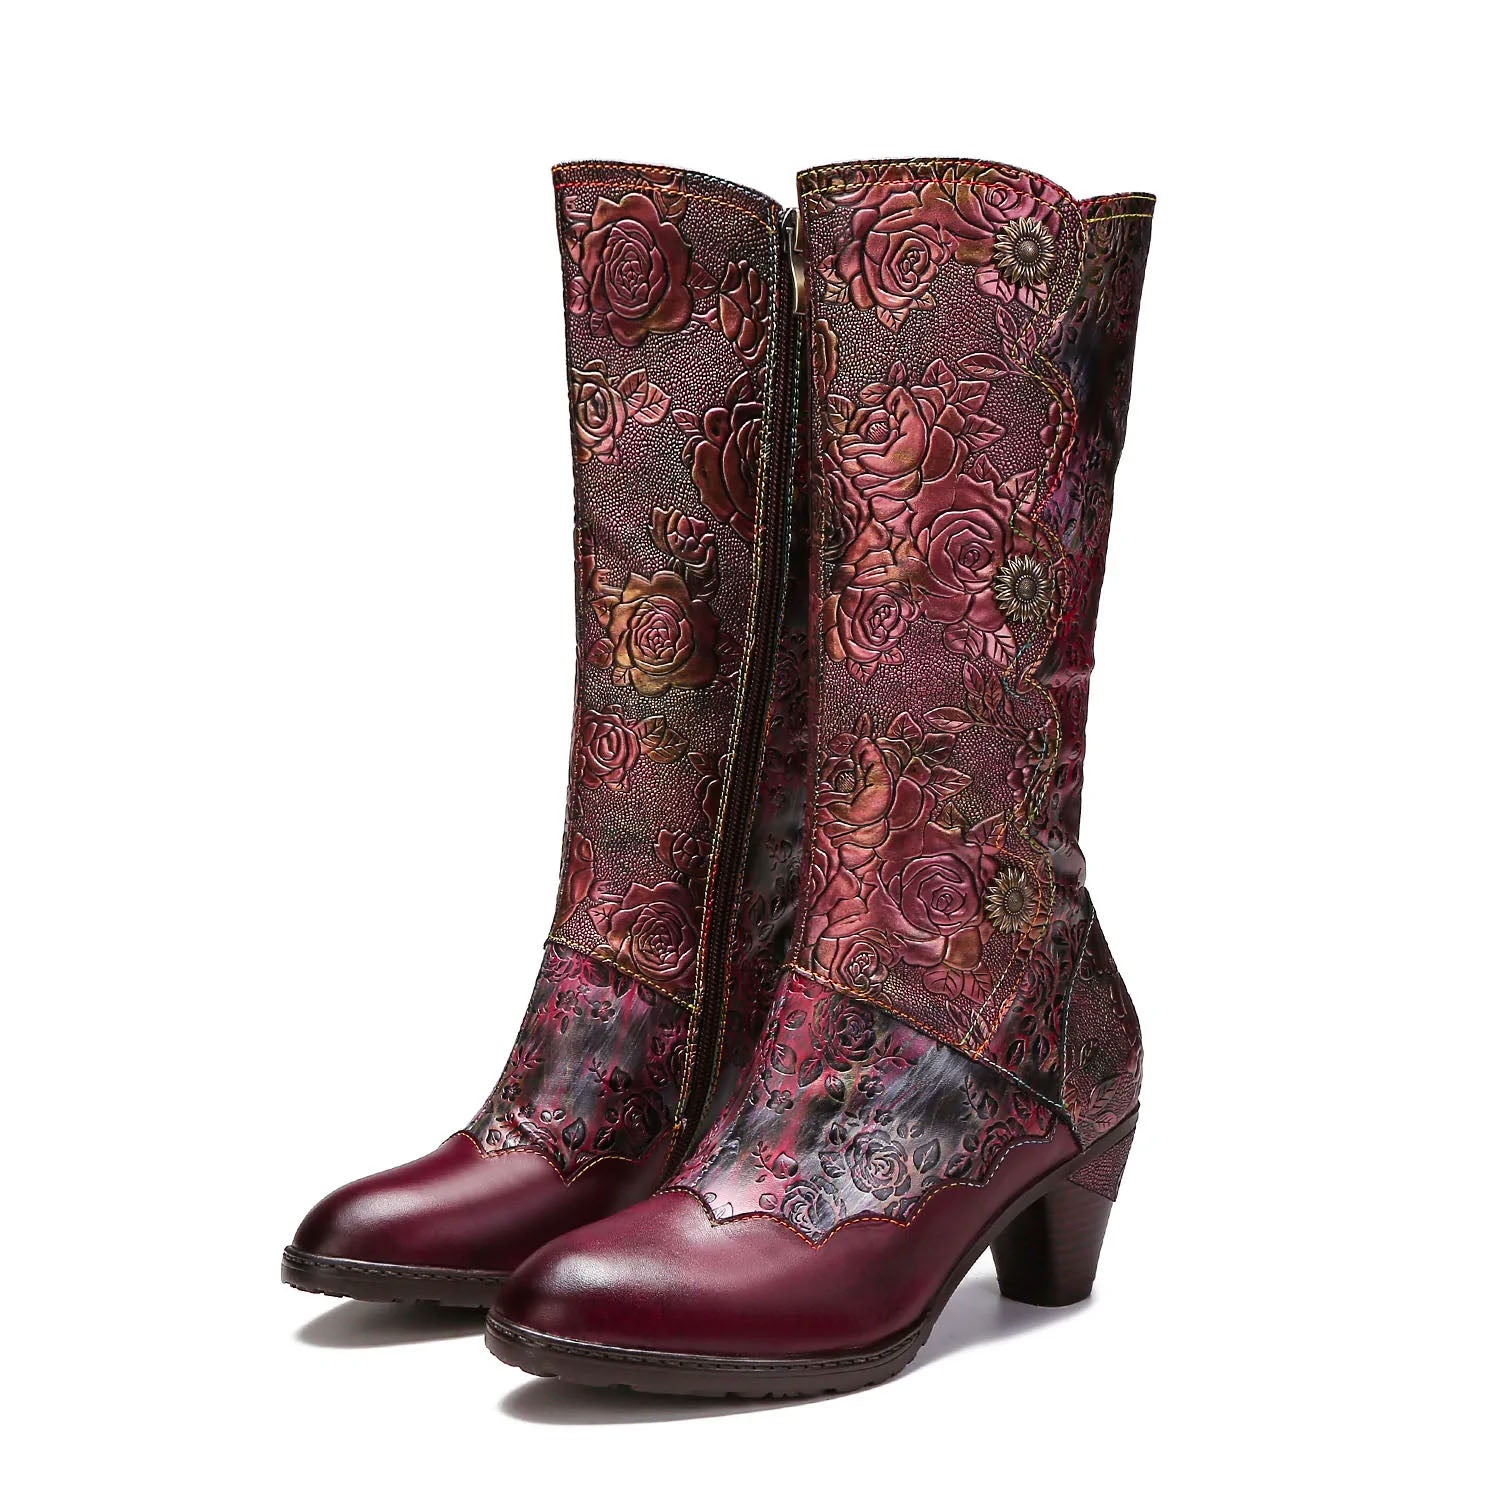 Women'sWarm Embossed Real Leather Button Boots